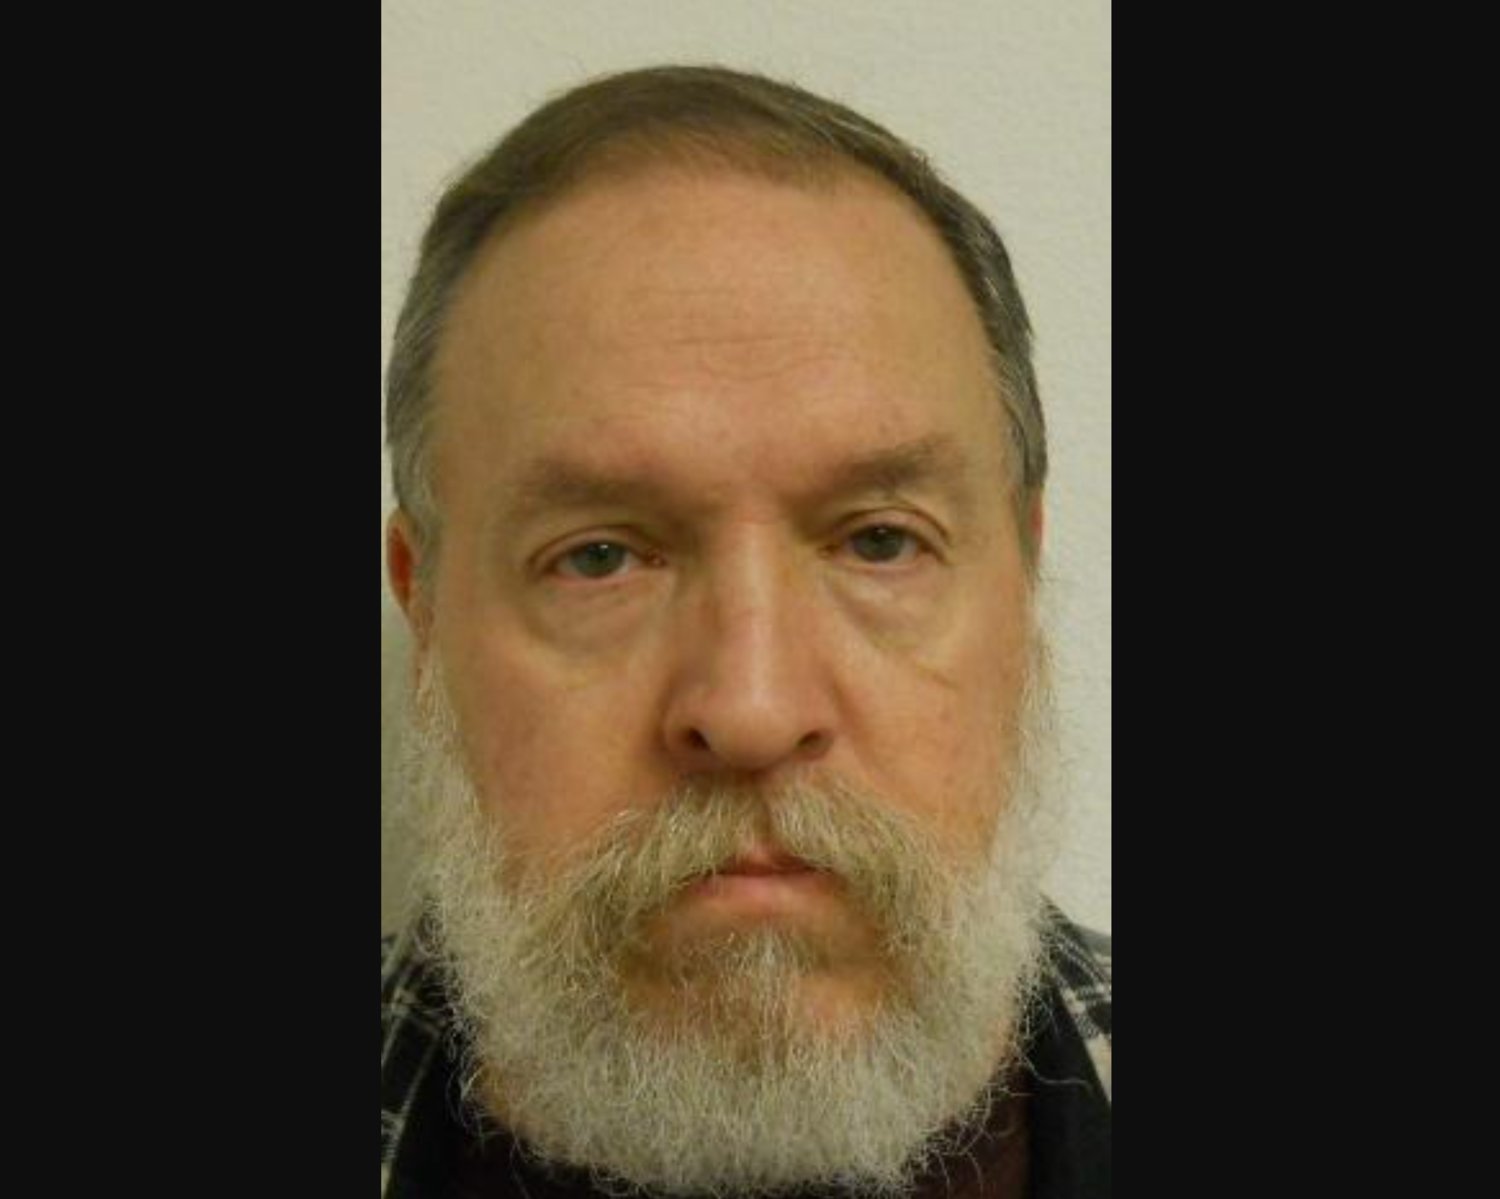 Richard D. Frye, 64, has been convicted for multiple sex crimes and has been classified as a high-risk to reoffend.